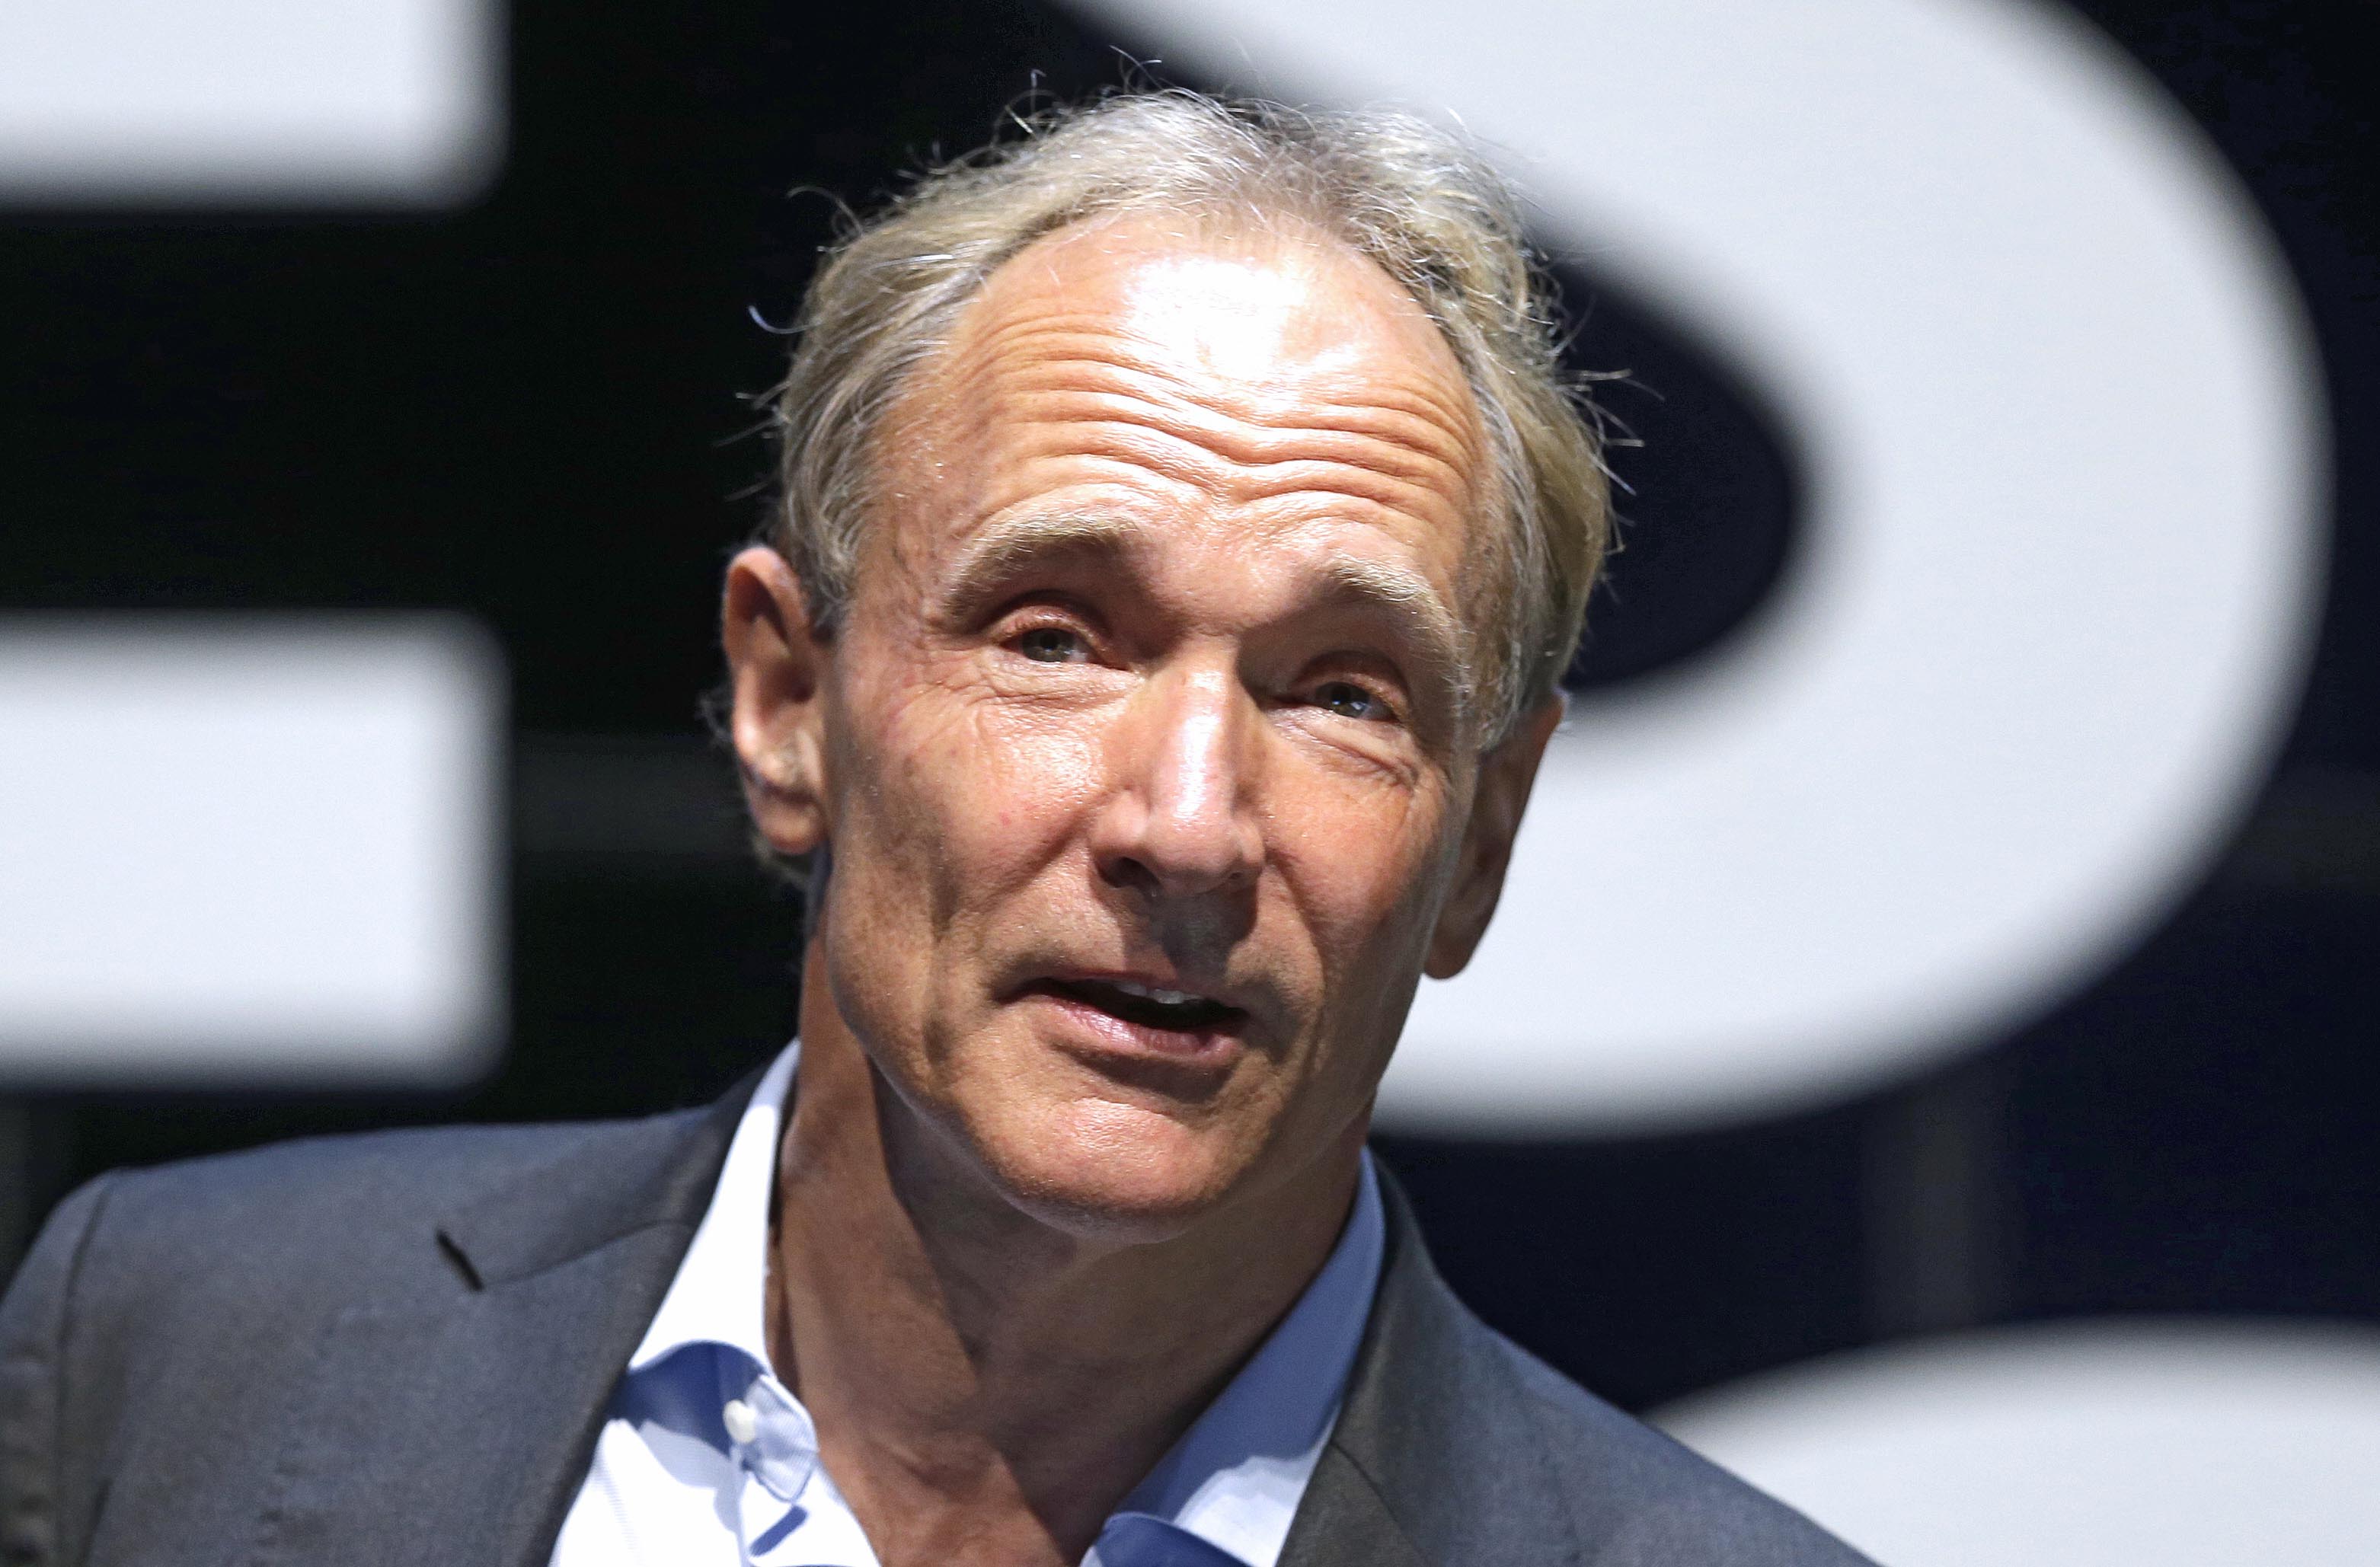 In this Tuesday, June 23, 2015 file photo, English computer scientist Tim Berners-Lee, best known as the inventor of the World Wide Web, attends the Cannes Lions 2015, International Advertising Festival in Cannes, southern France. Photo: AP